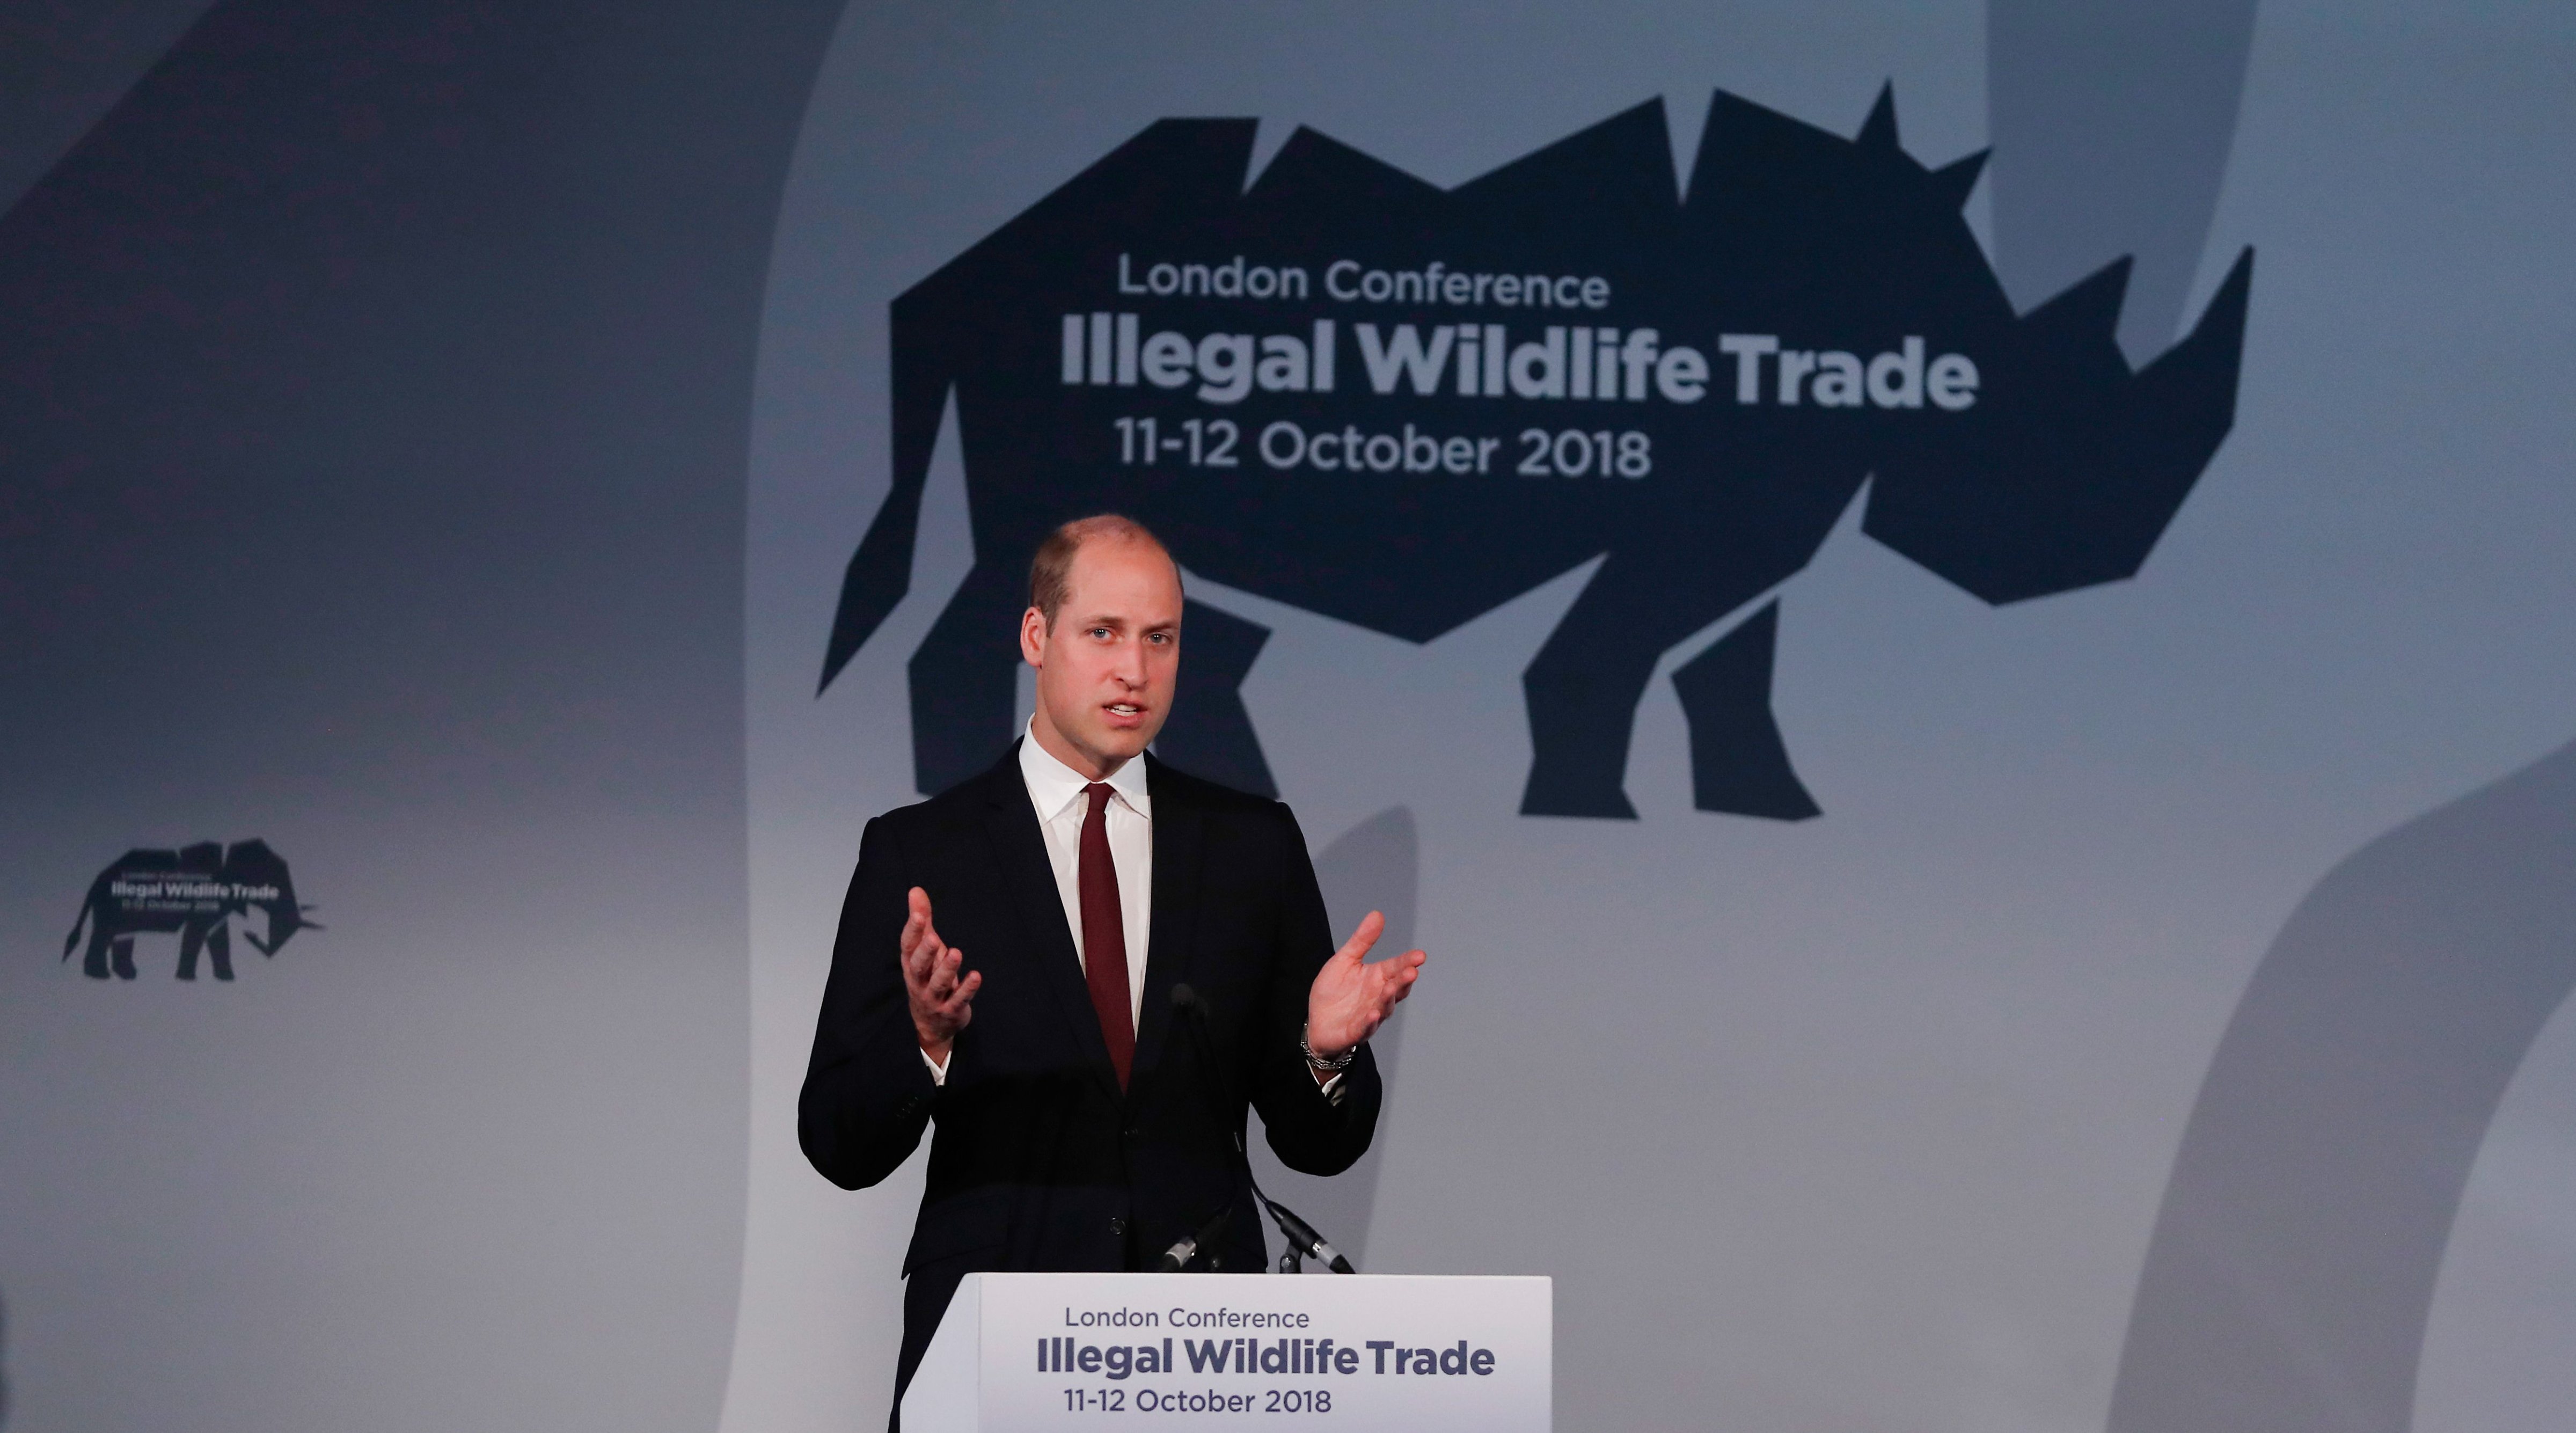 Britain's Prince William, Duke of Cambridge gives the keynote speech at the 2018 Illegal Wildlife Trade Conference in London on October 11, 2018. (ALASTAIR GRANT&mdash;AFP/Getty Images)